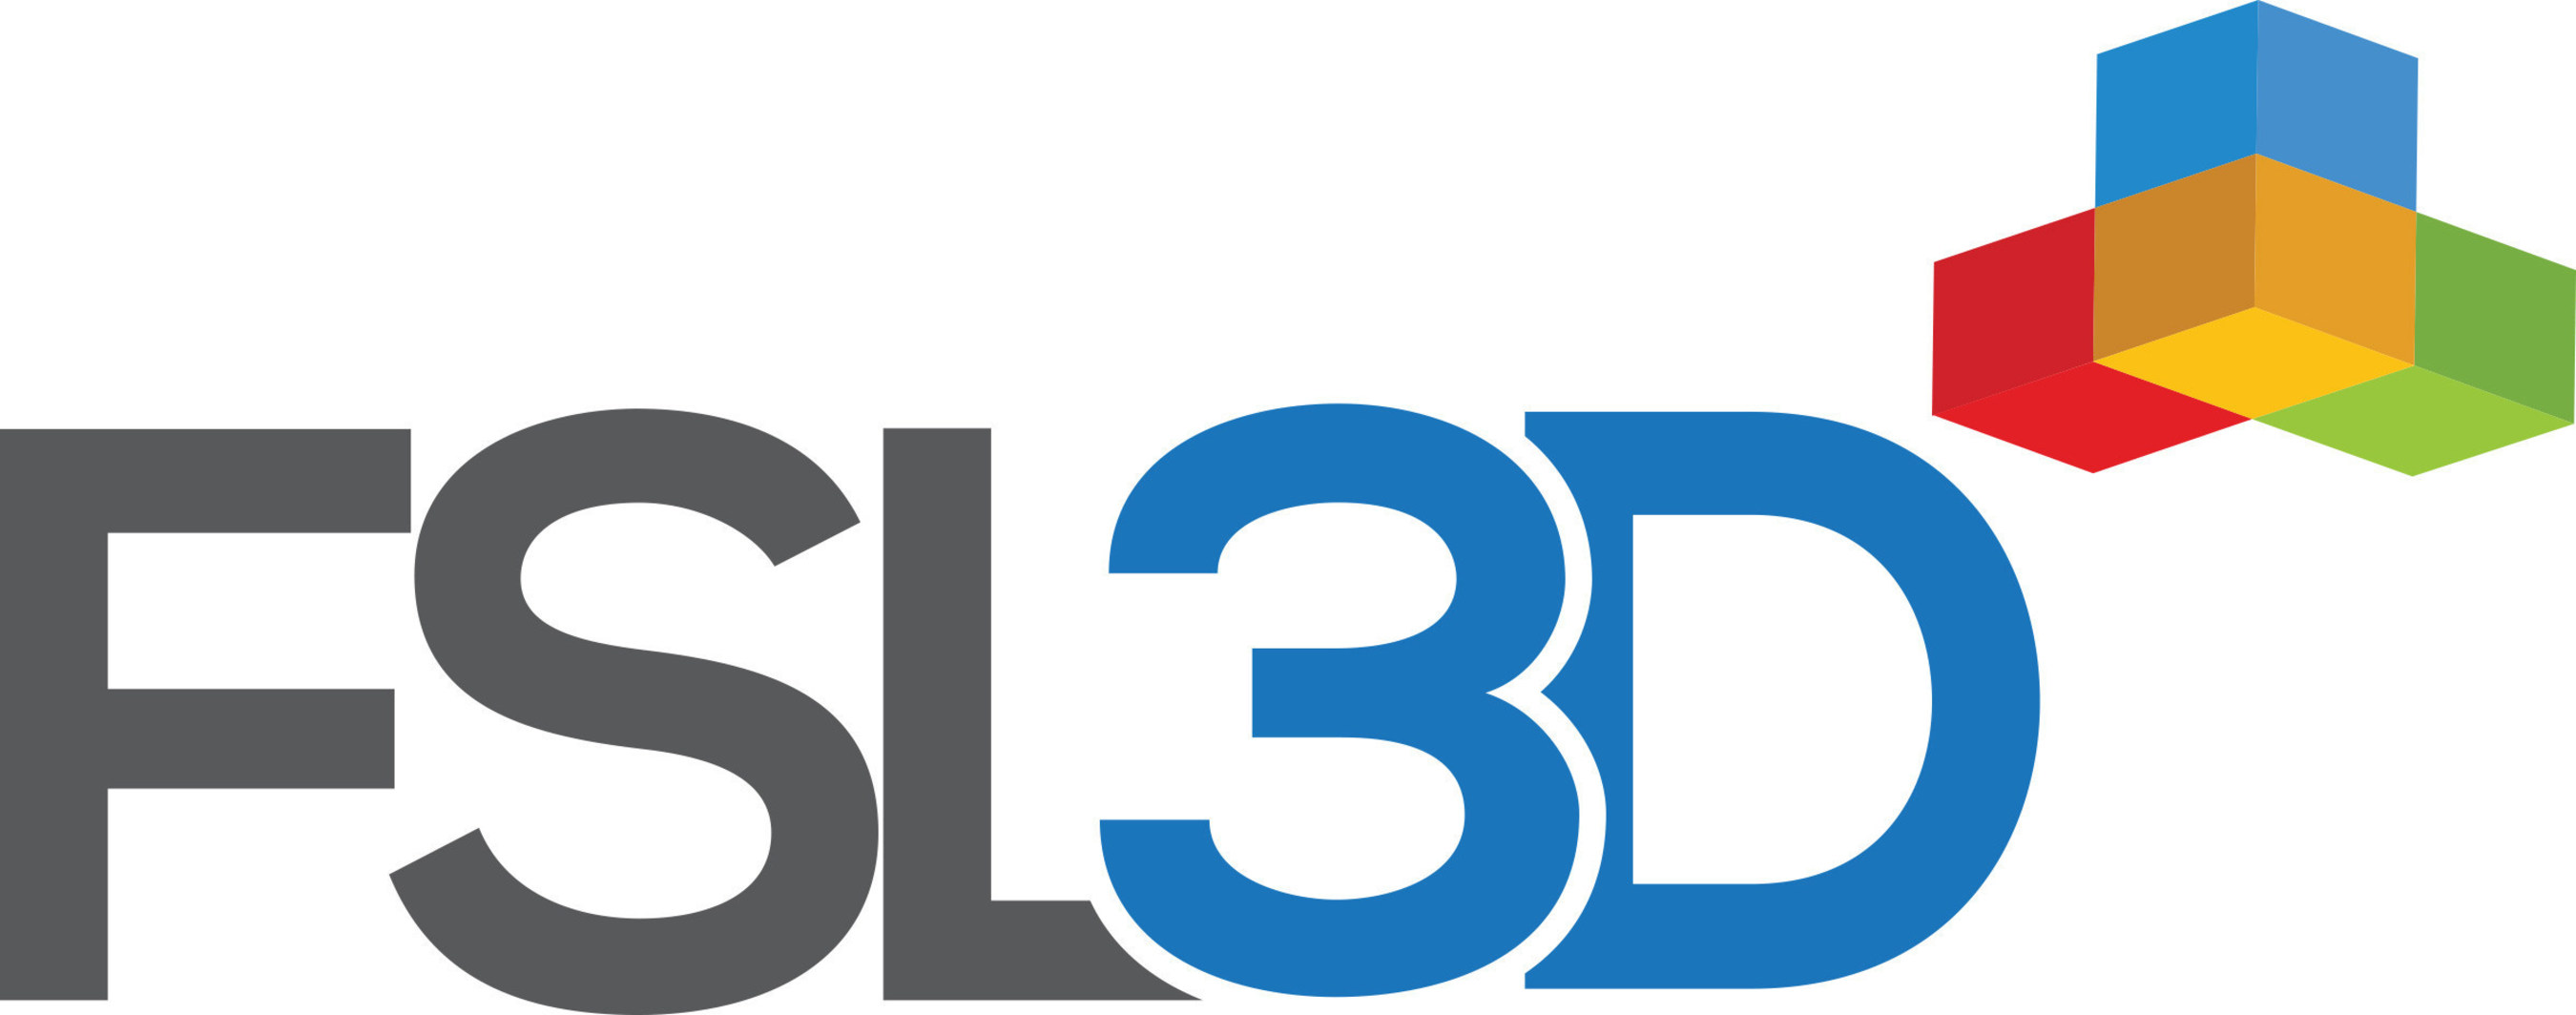 Full Spectrum Laser LLC (FSL), and its FSL3D subsidiary, the rapidly-growing laser and 3D printer engineering and manufacturing company based in Las Vegas, NV, has received a $10 million growth equity investment from Summer Street Capital III, L.P.